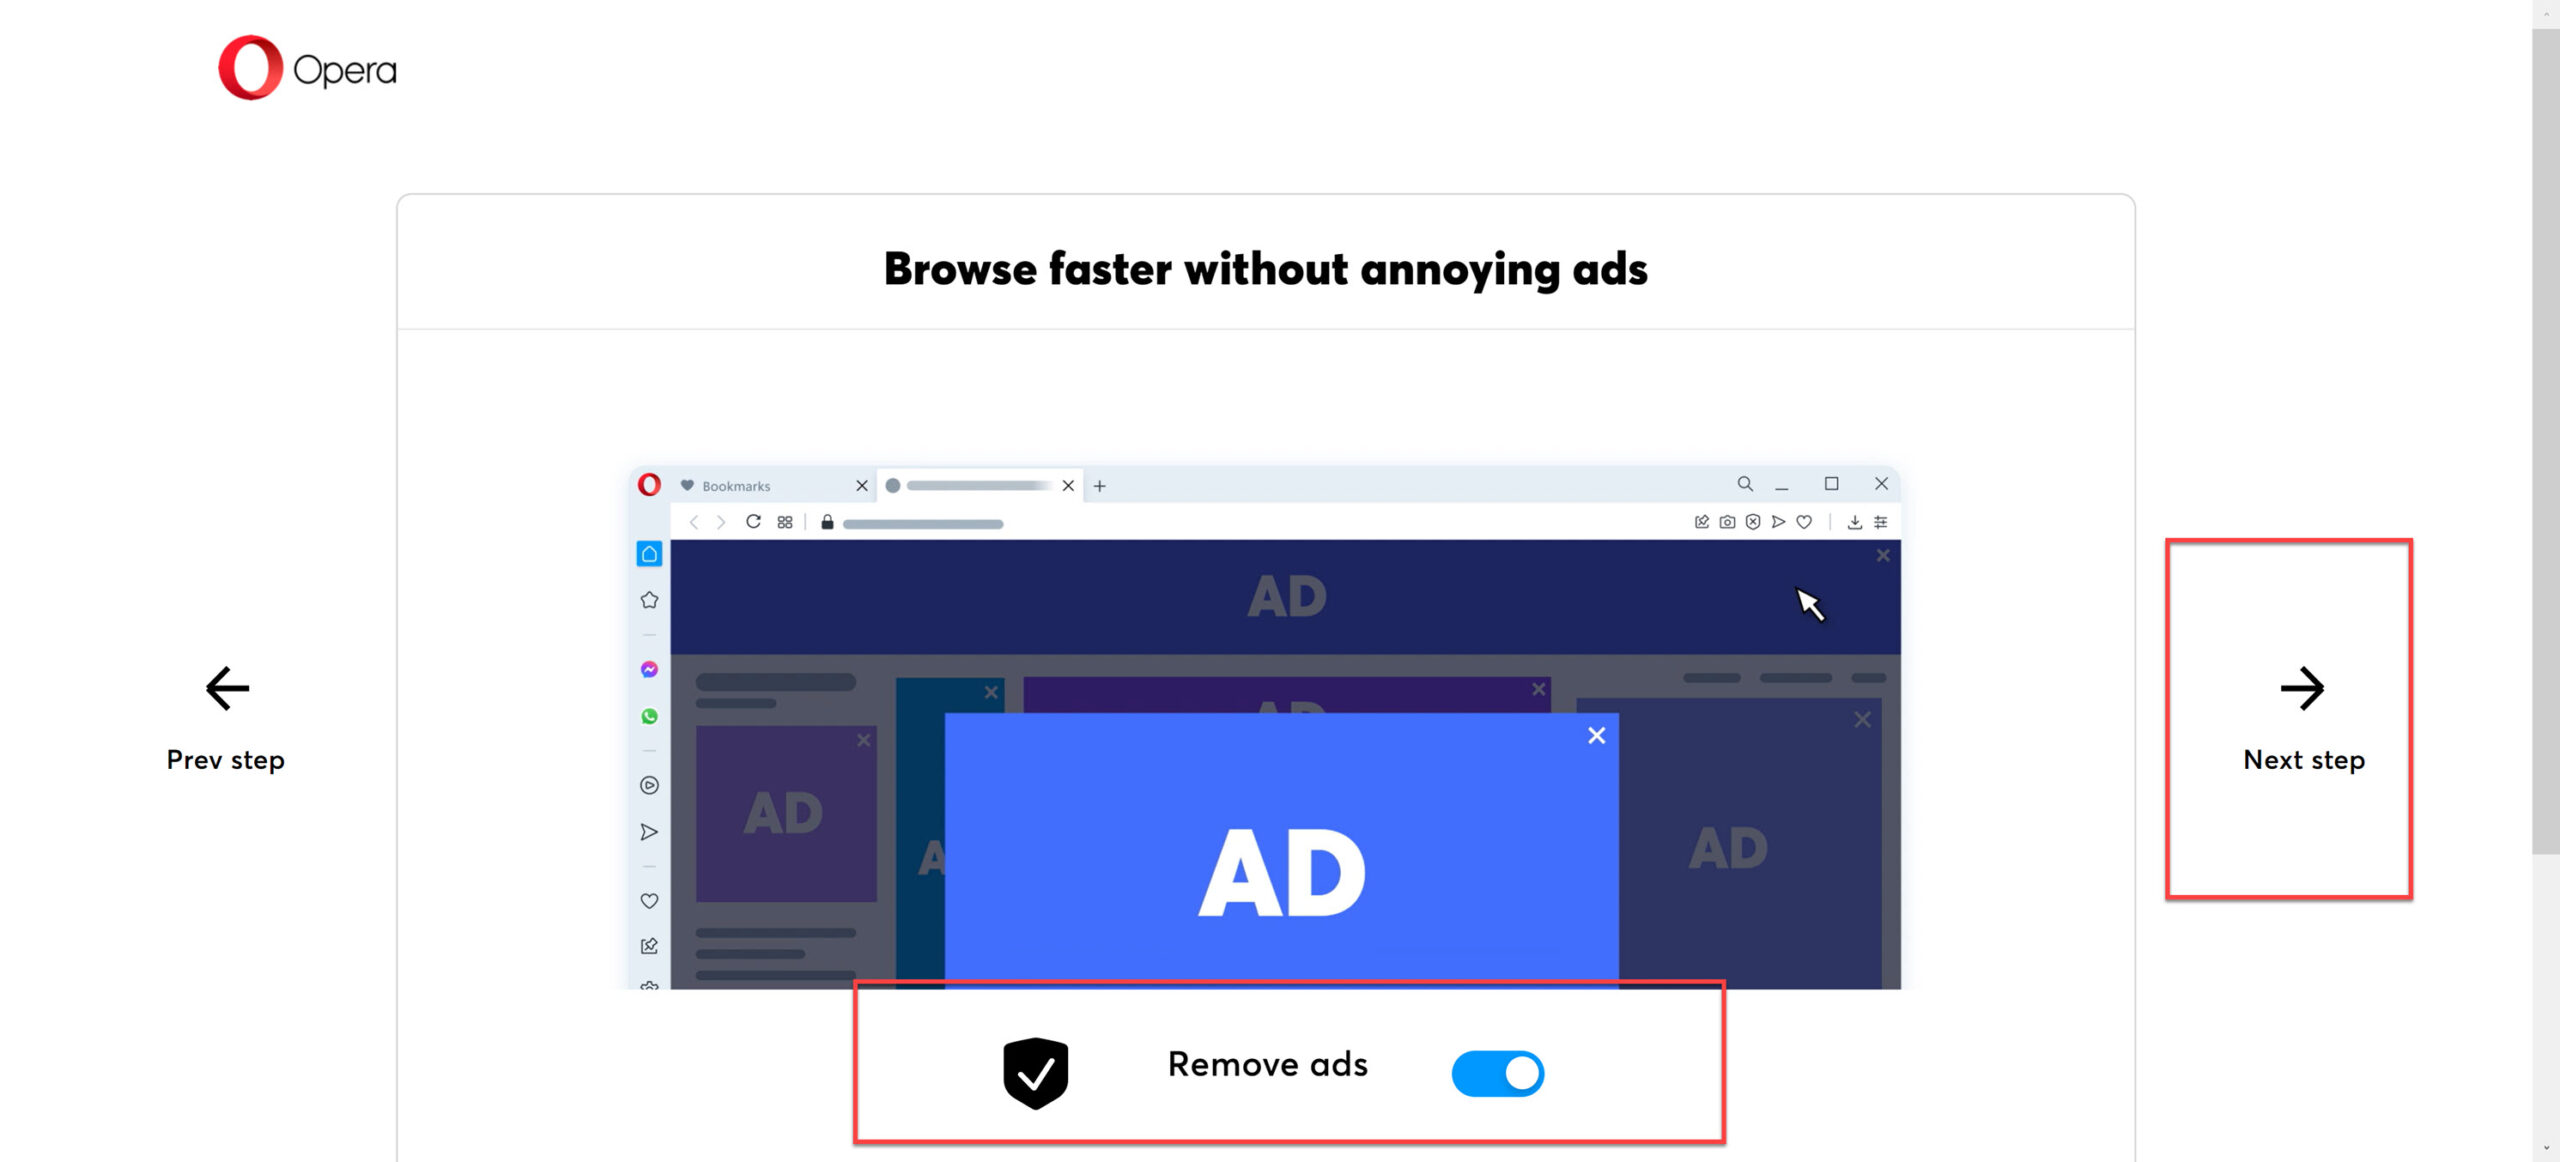 Remove ads if you want